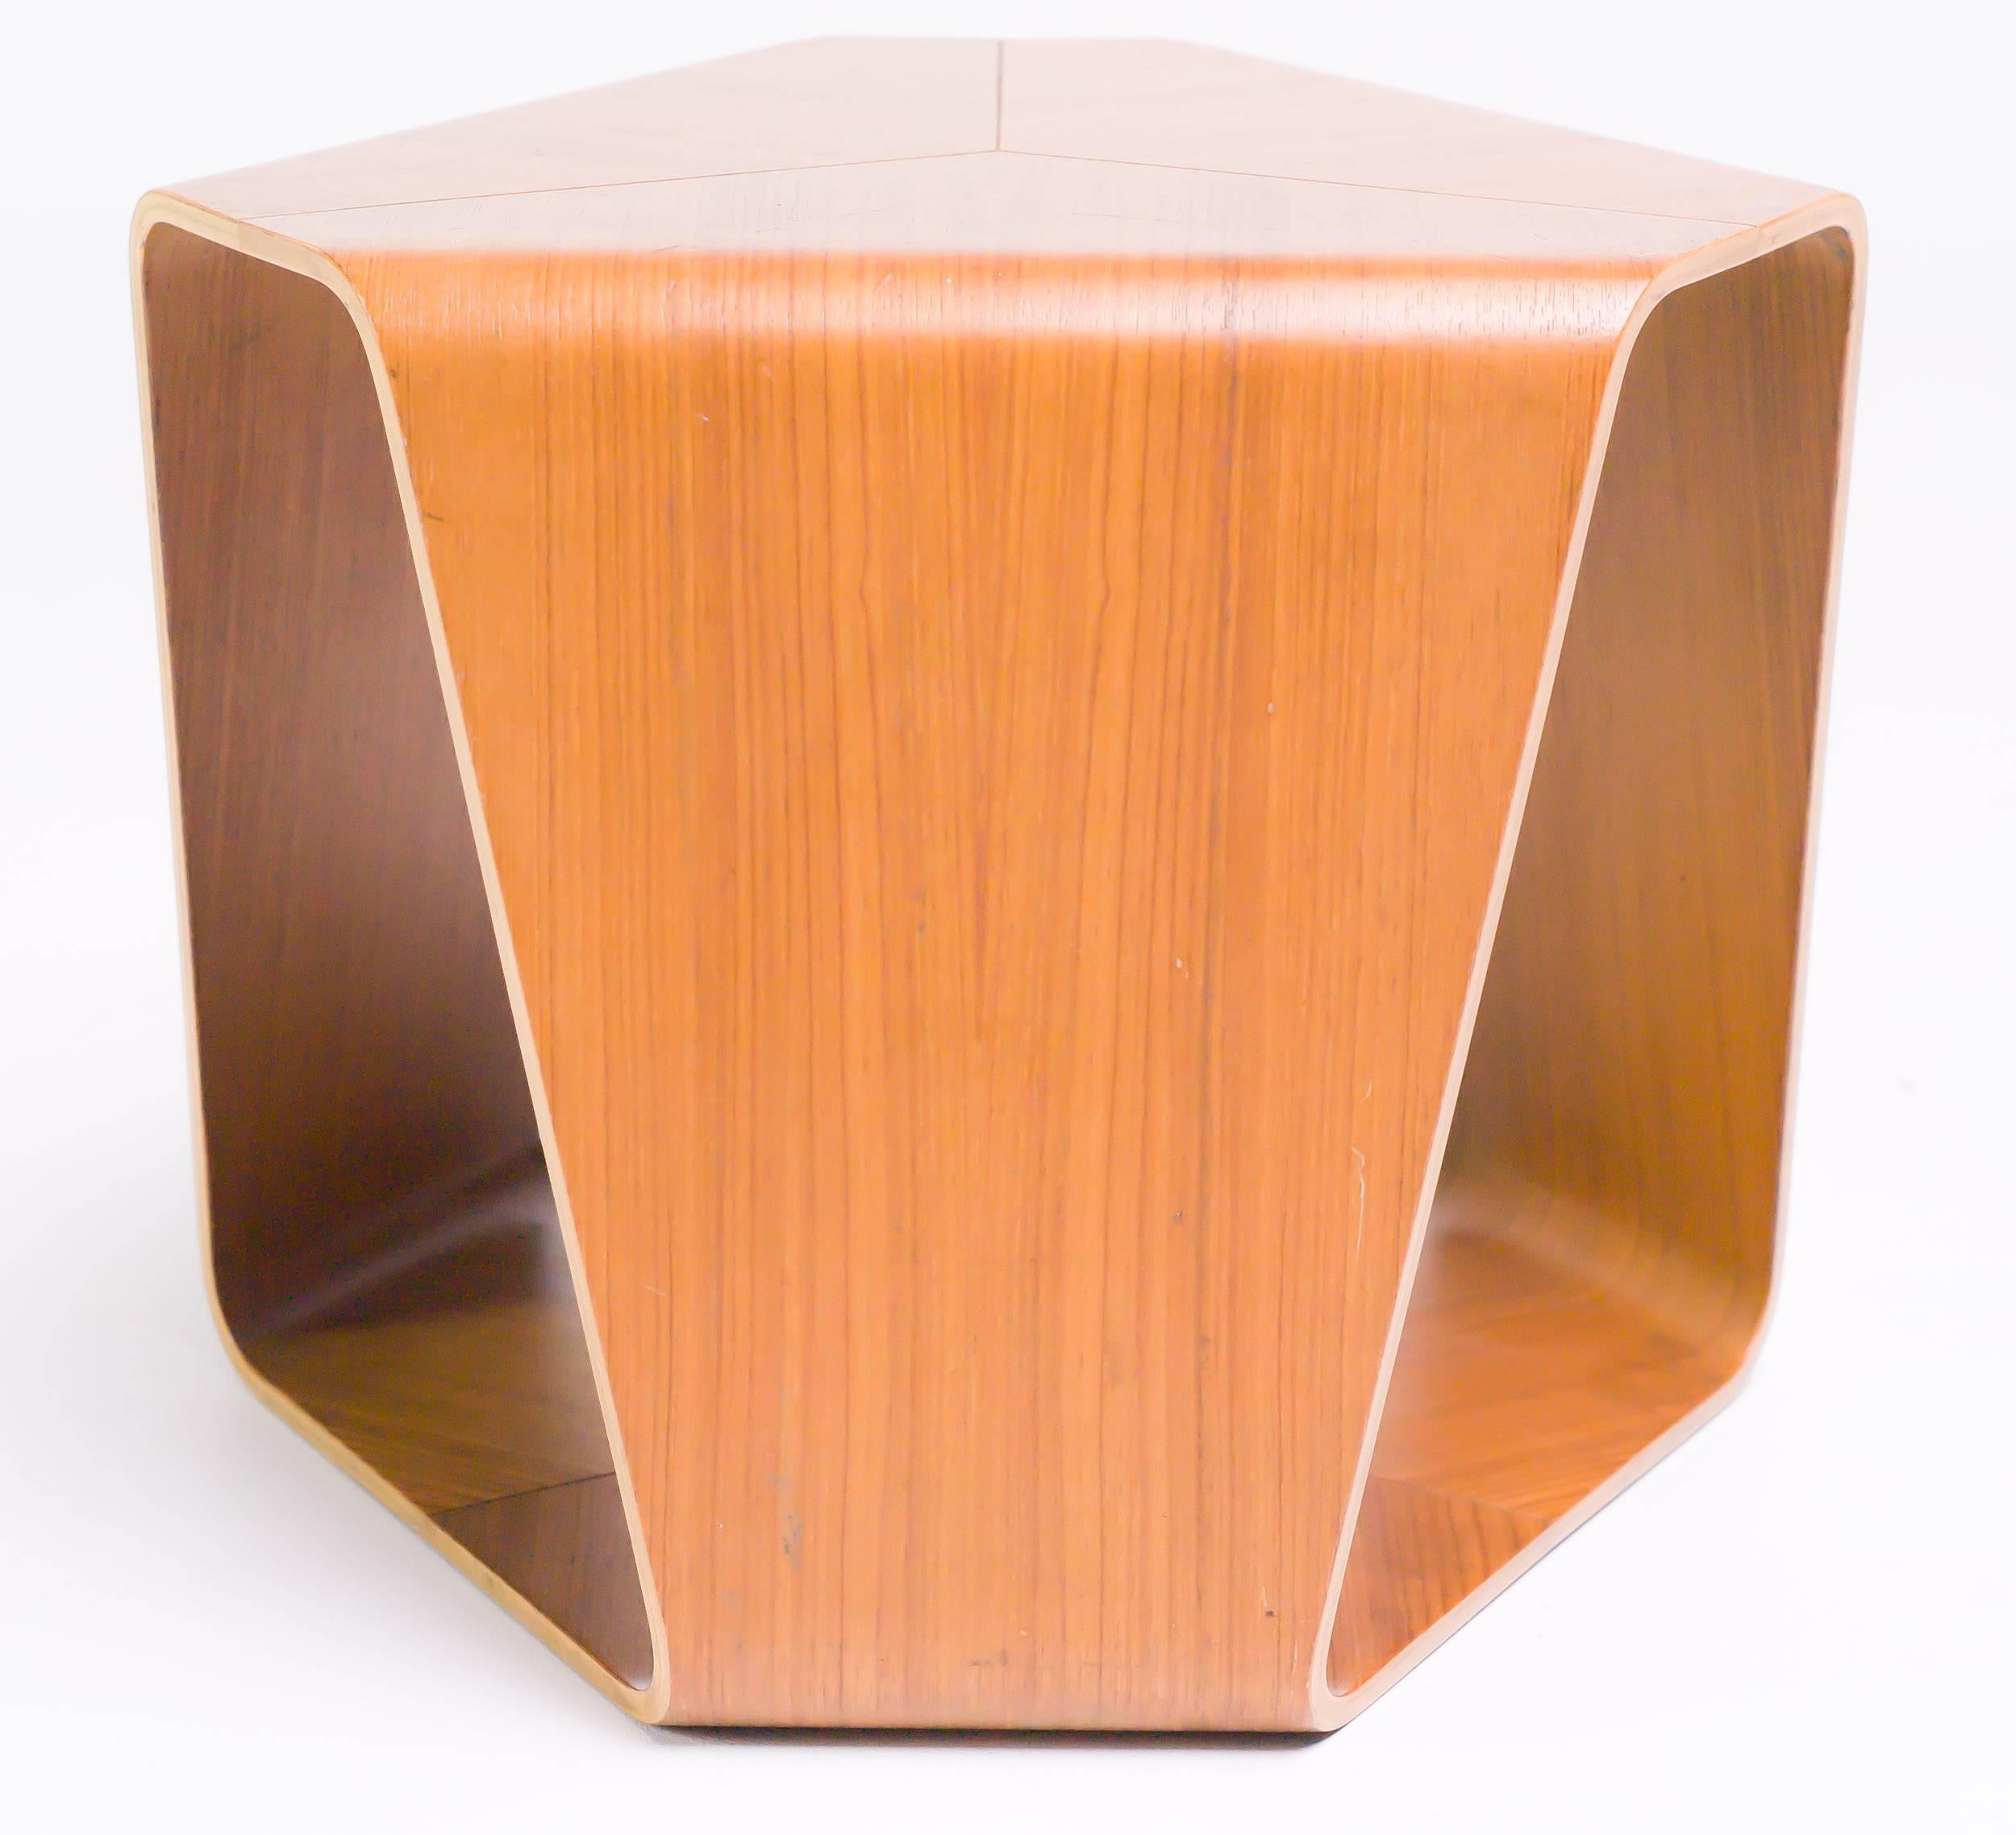 Amazing craftsmanship in walnut plywood by Tendo Mokko also manufacturer of the popular Sori Yanagi stool.
Literature: Design Japonais, 1950-1995, Centre Georges Pompidou exhibition catalog, pg. 74.
 
Excellent fast and affordable worldwide